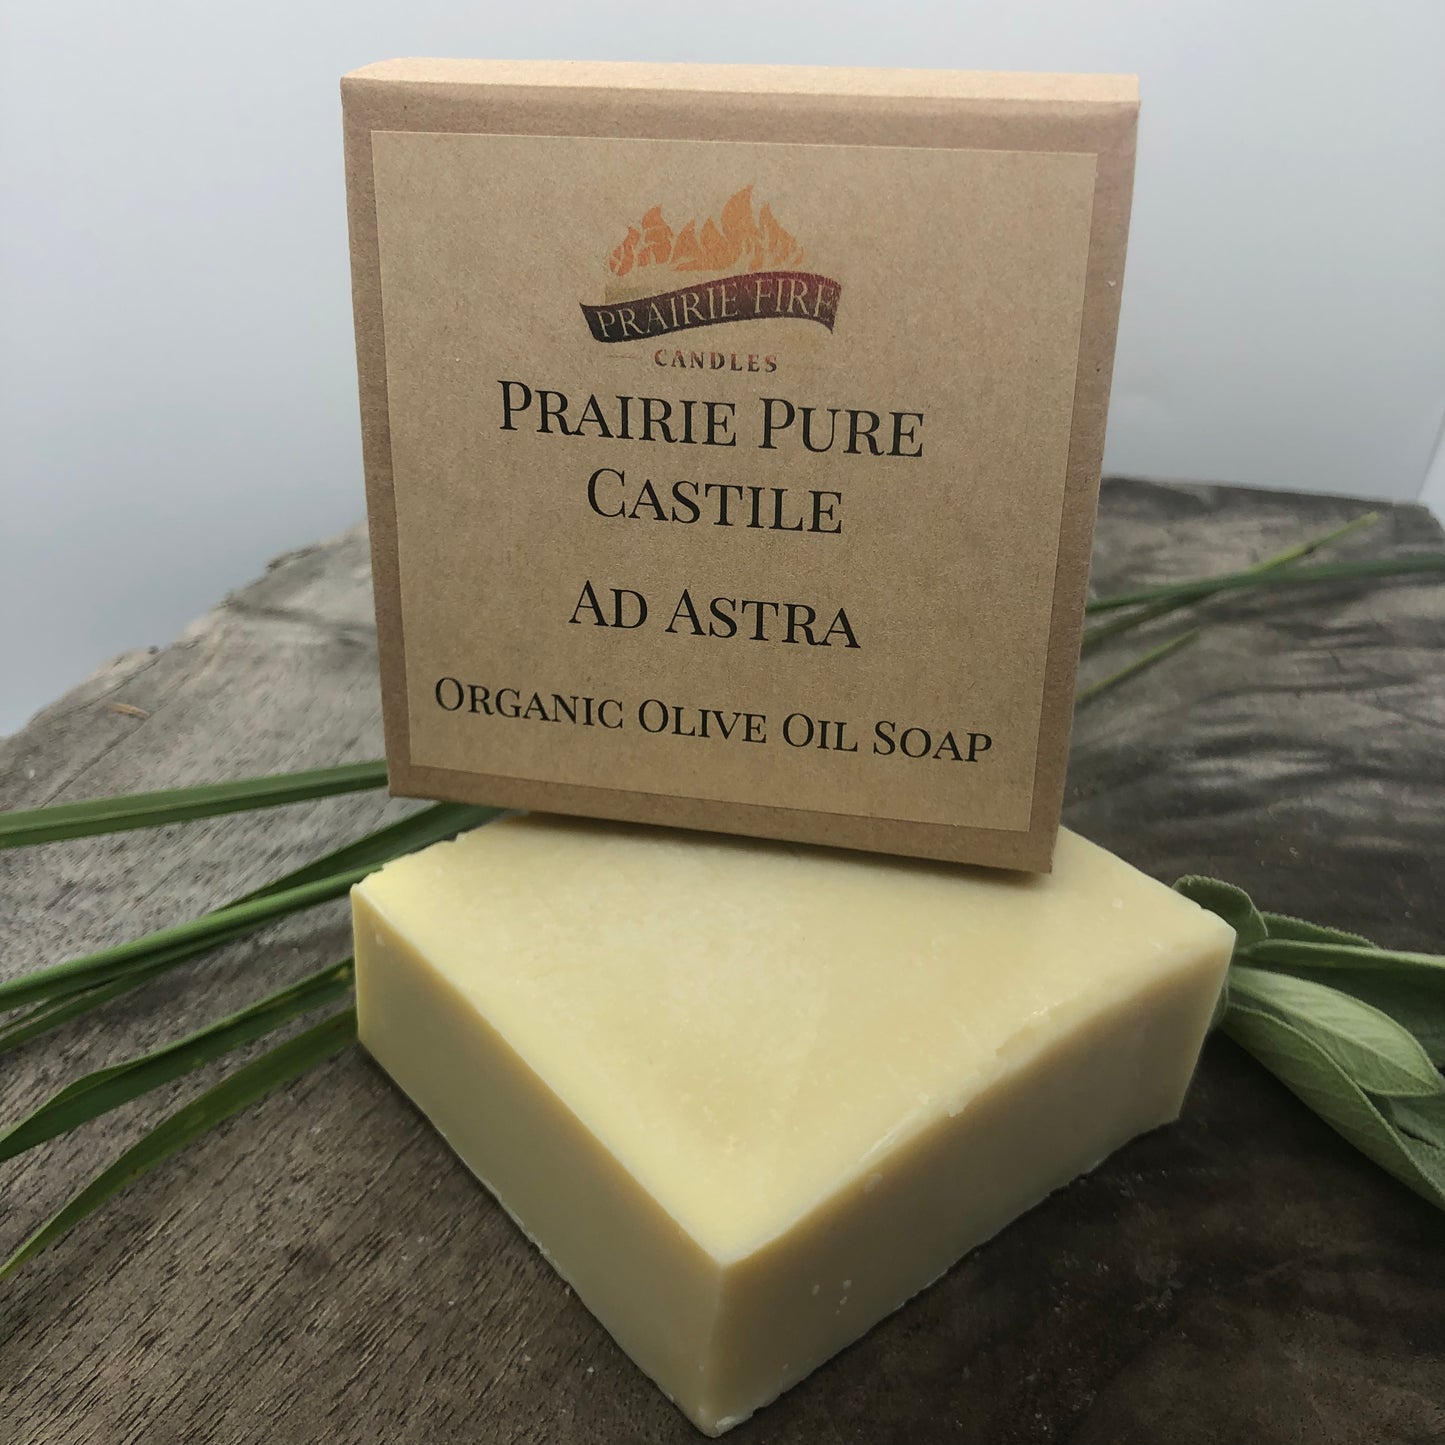 Ad Astra Real Castile Organic Olive Oil Soap for Sensitive Skin - Dye Free - 100% Certified Organic Extra Virgin Olive Oil - Prairie Fire Candles